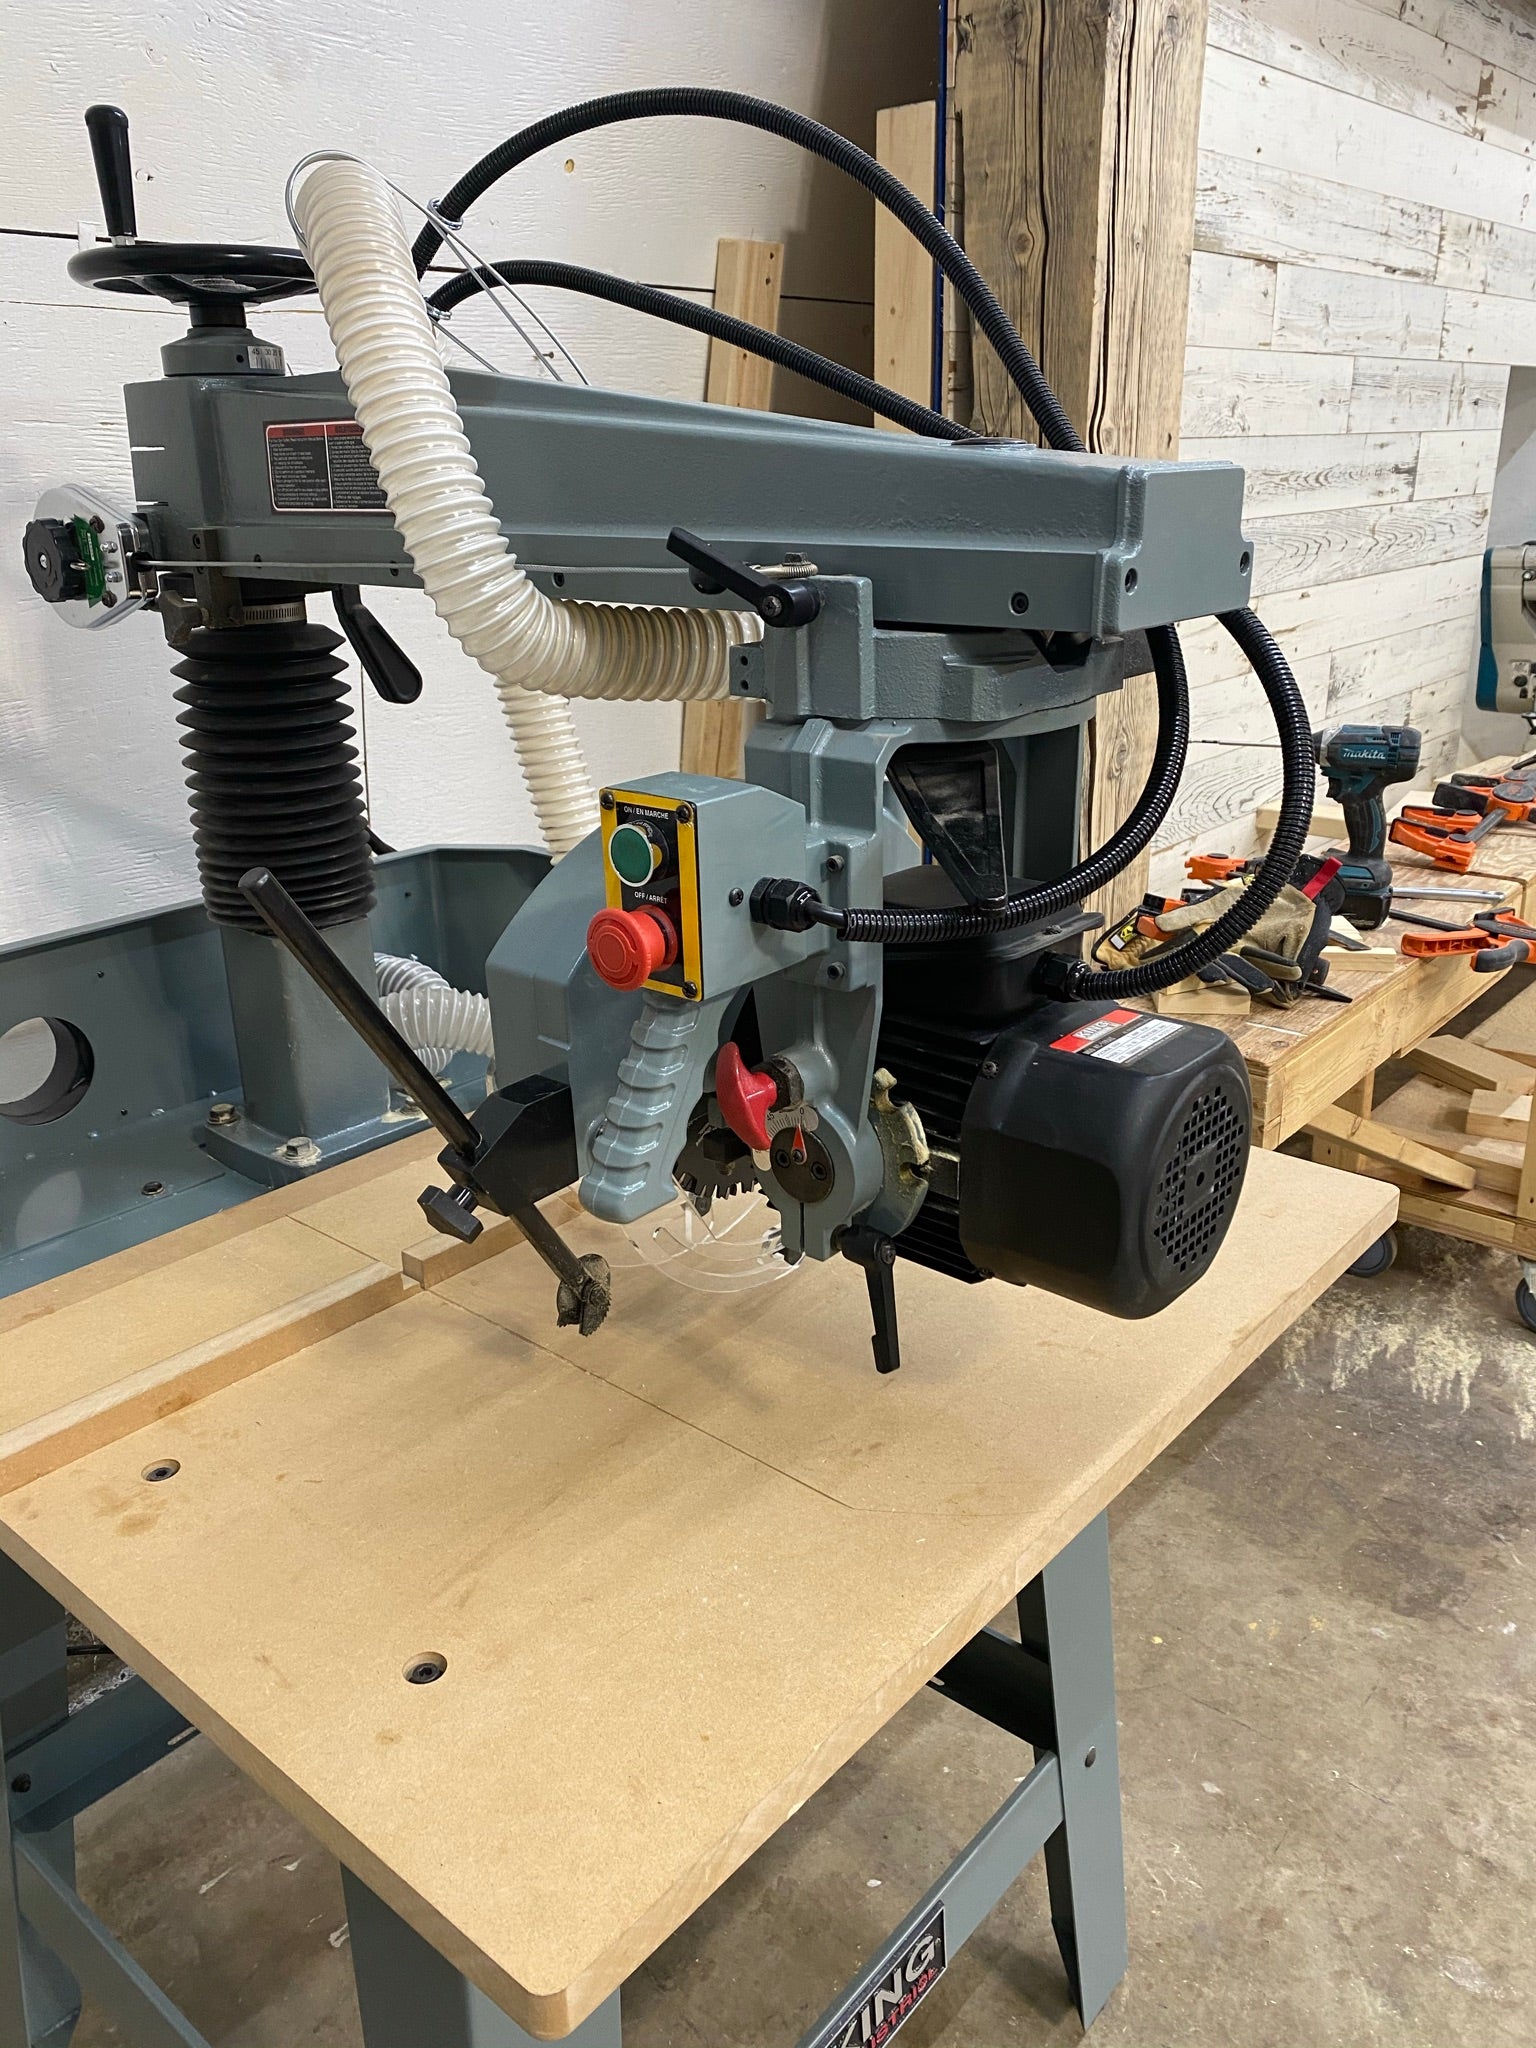 Radial Arm Saw turned